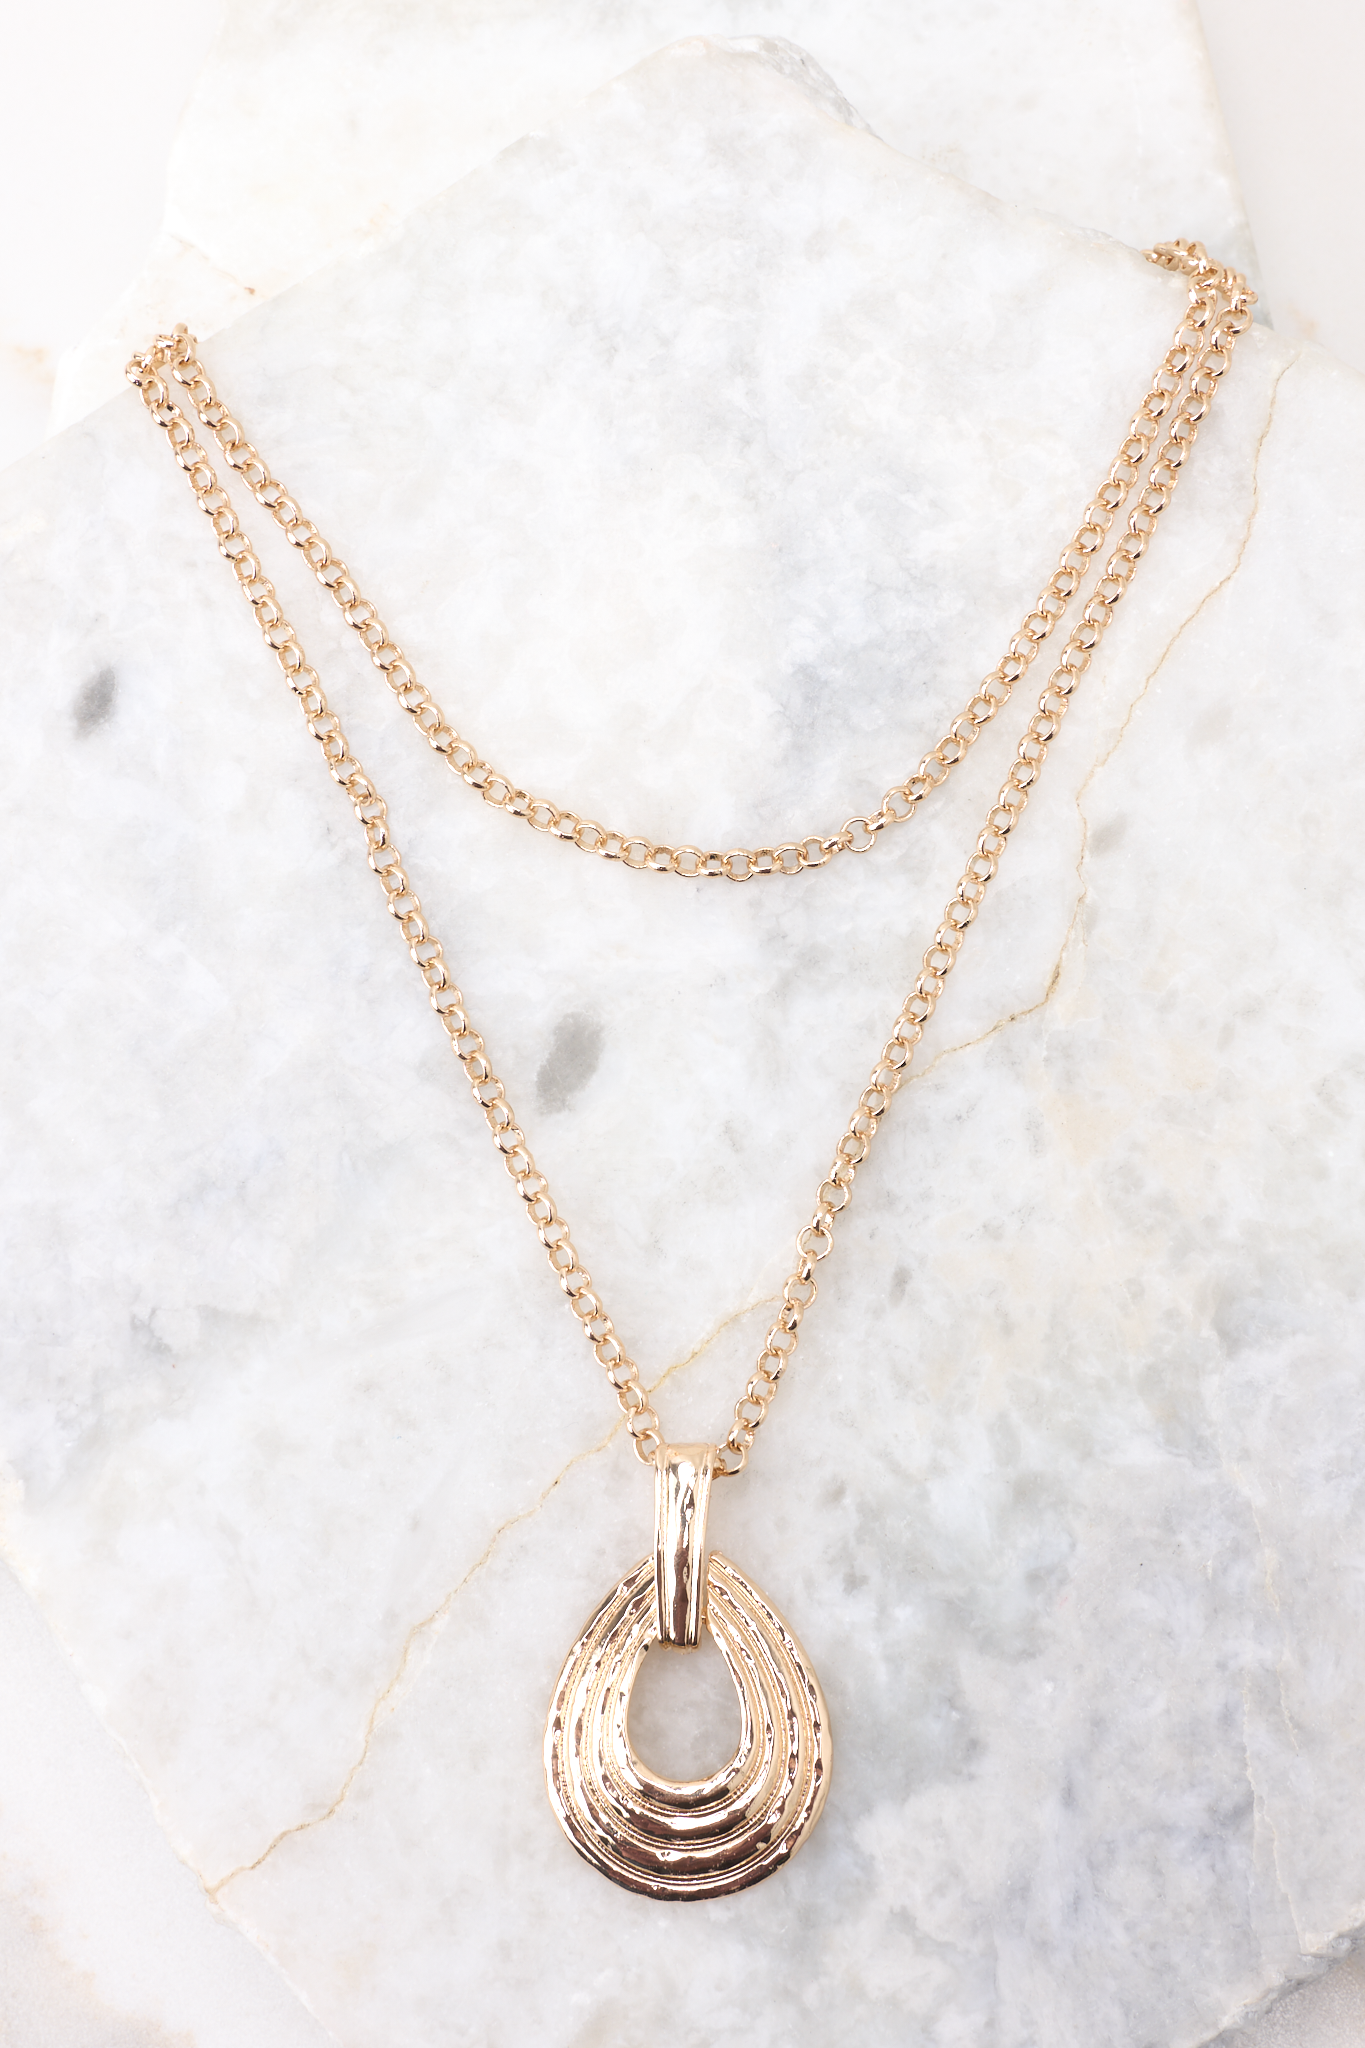 Close up view of this necklace that features a teardrop shaped pendant, a long chain that can be wrapped for a shorter length, and a lobster clasp. 